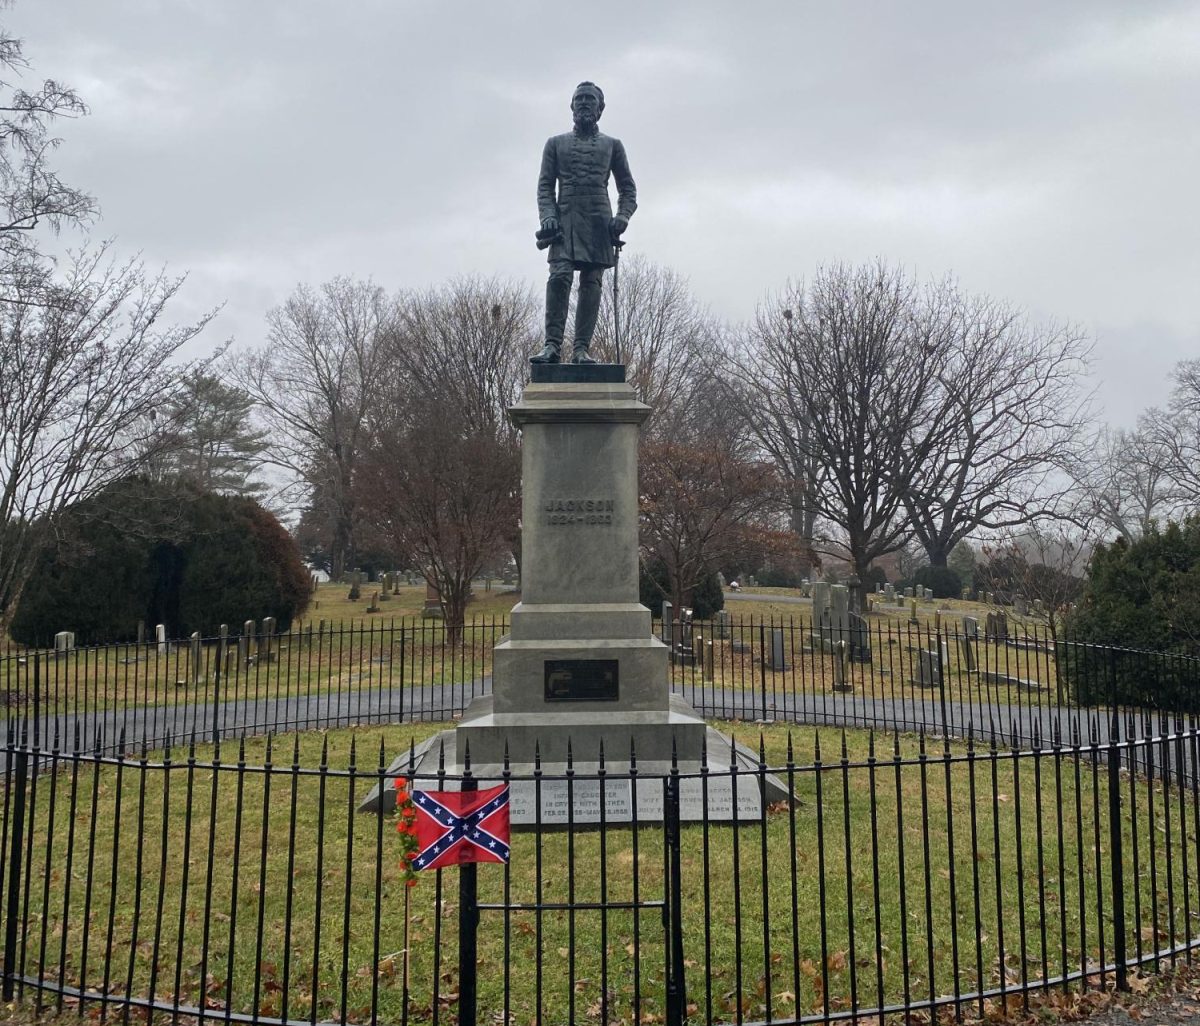 Lexington City Council members voted unanimously to change the name of Stonewall Jackson Memorial Cemetery after Alexander’s speech. Photo by Catherine McKean, ’24